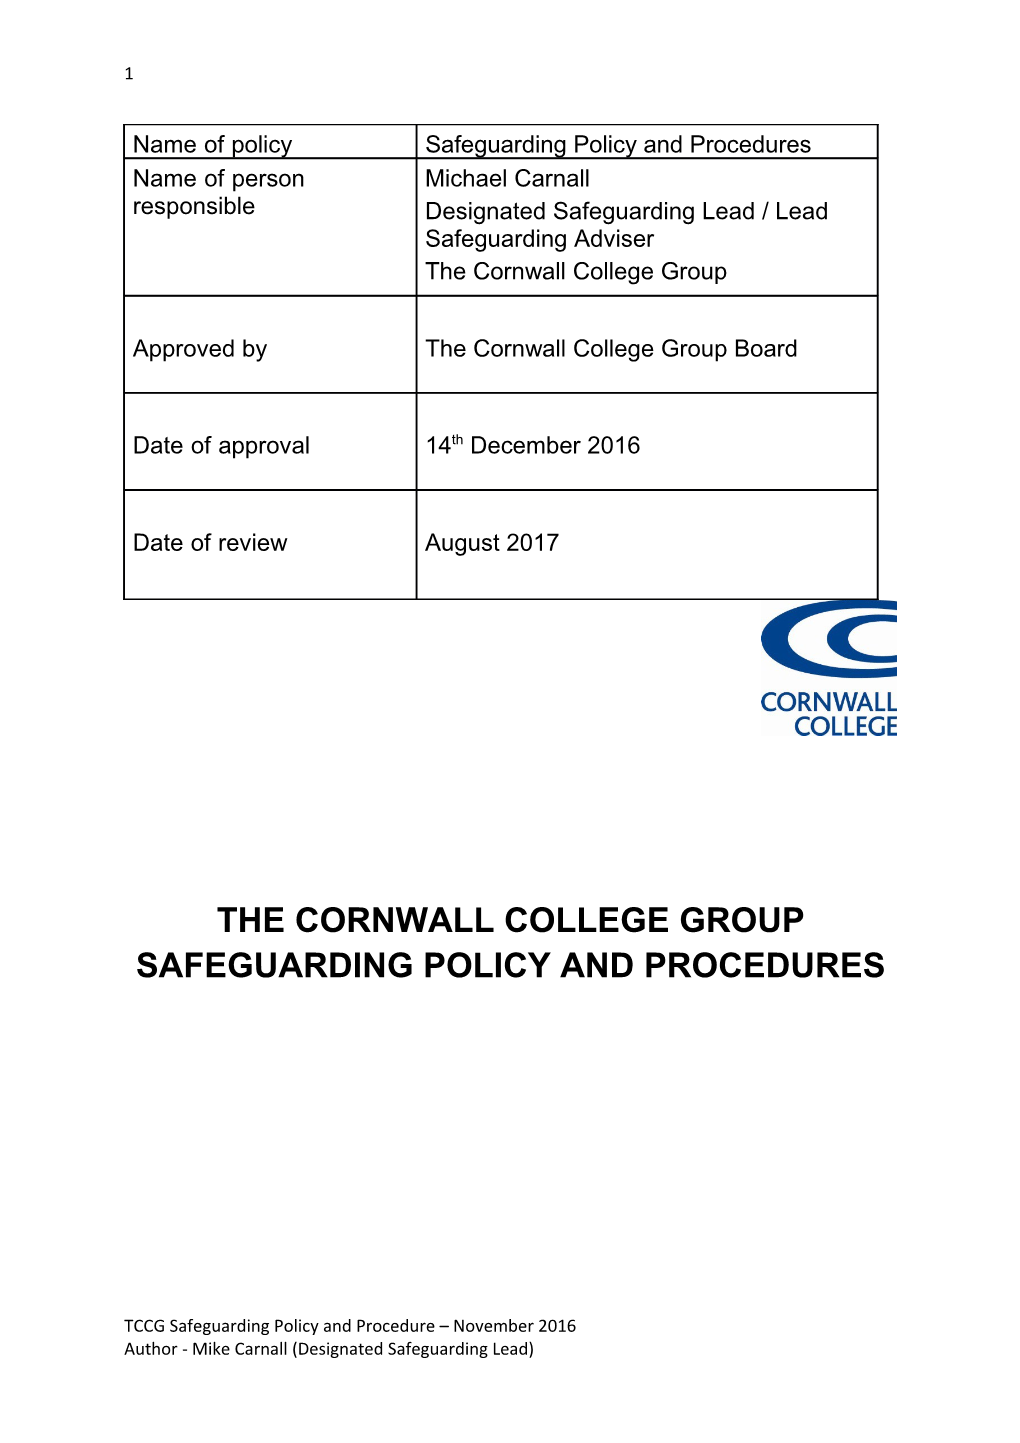 Cornwall College Safeguarding Policy and Procedure